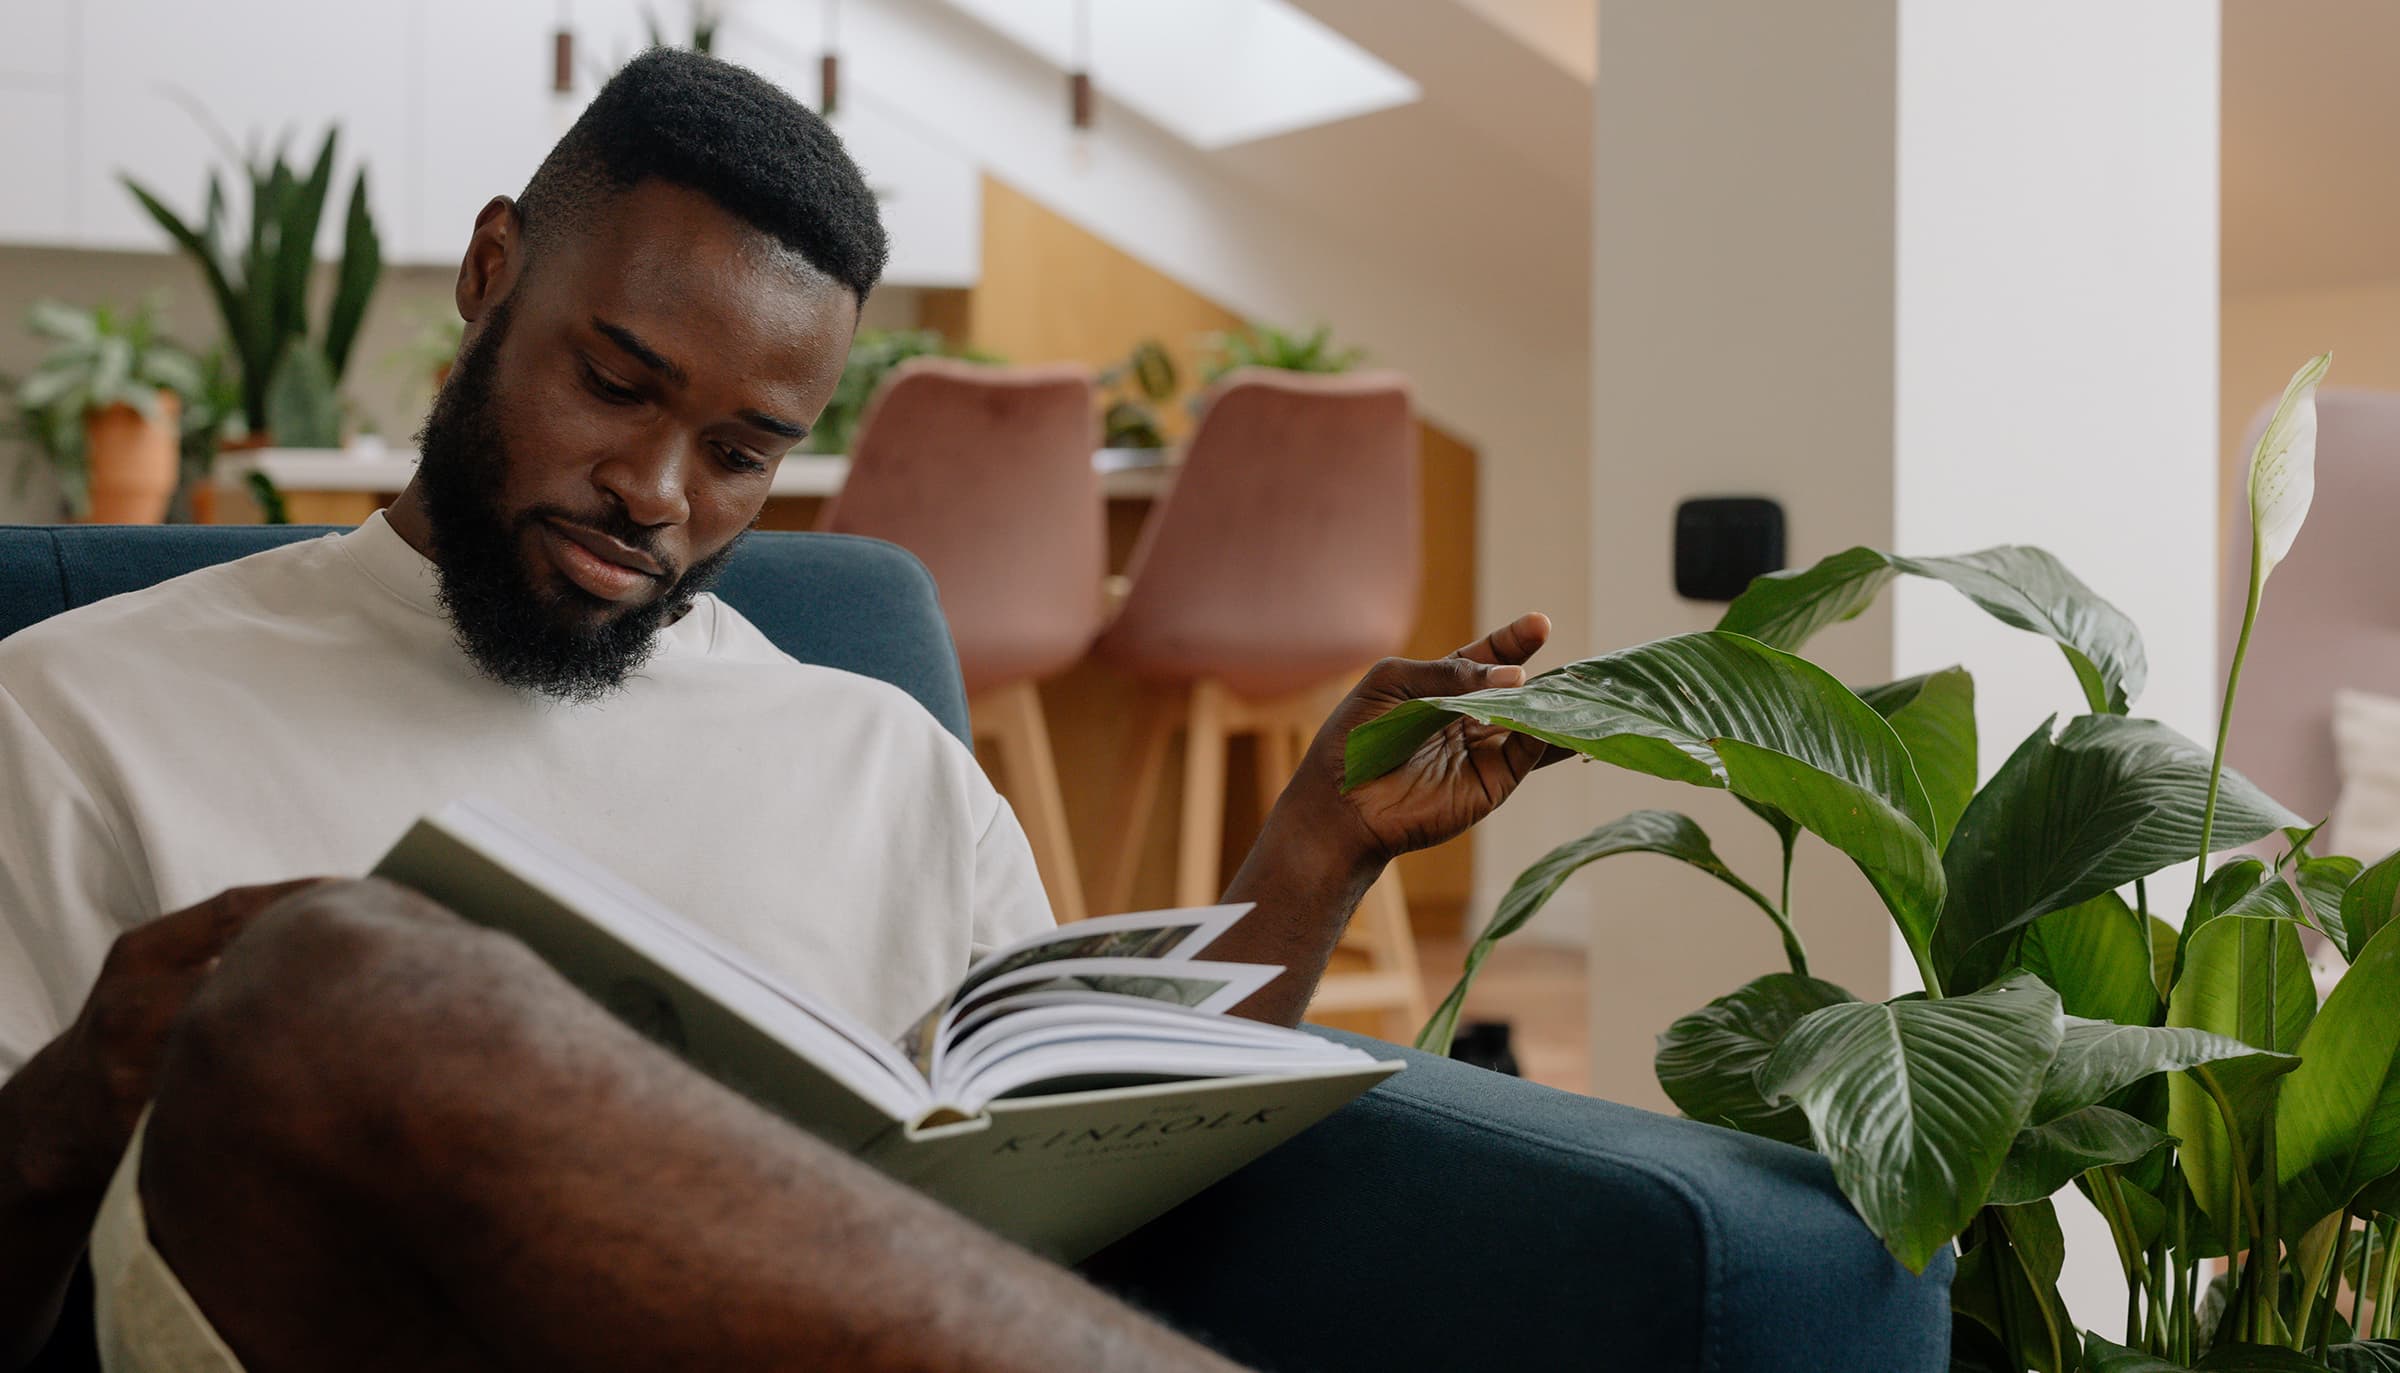 Man sitting on a sofa reading a book next to a plant